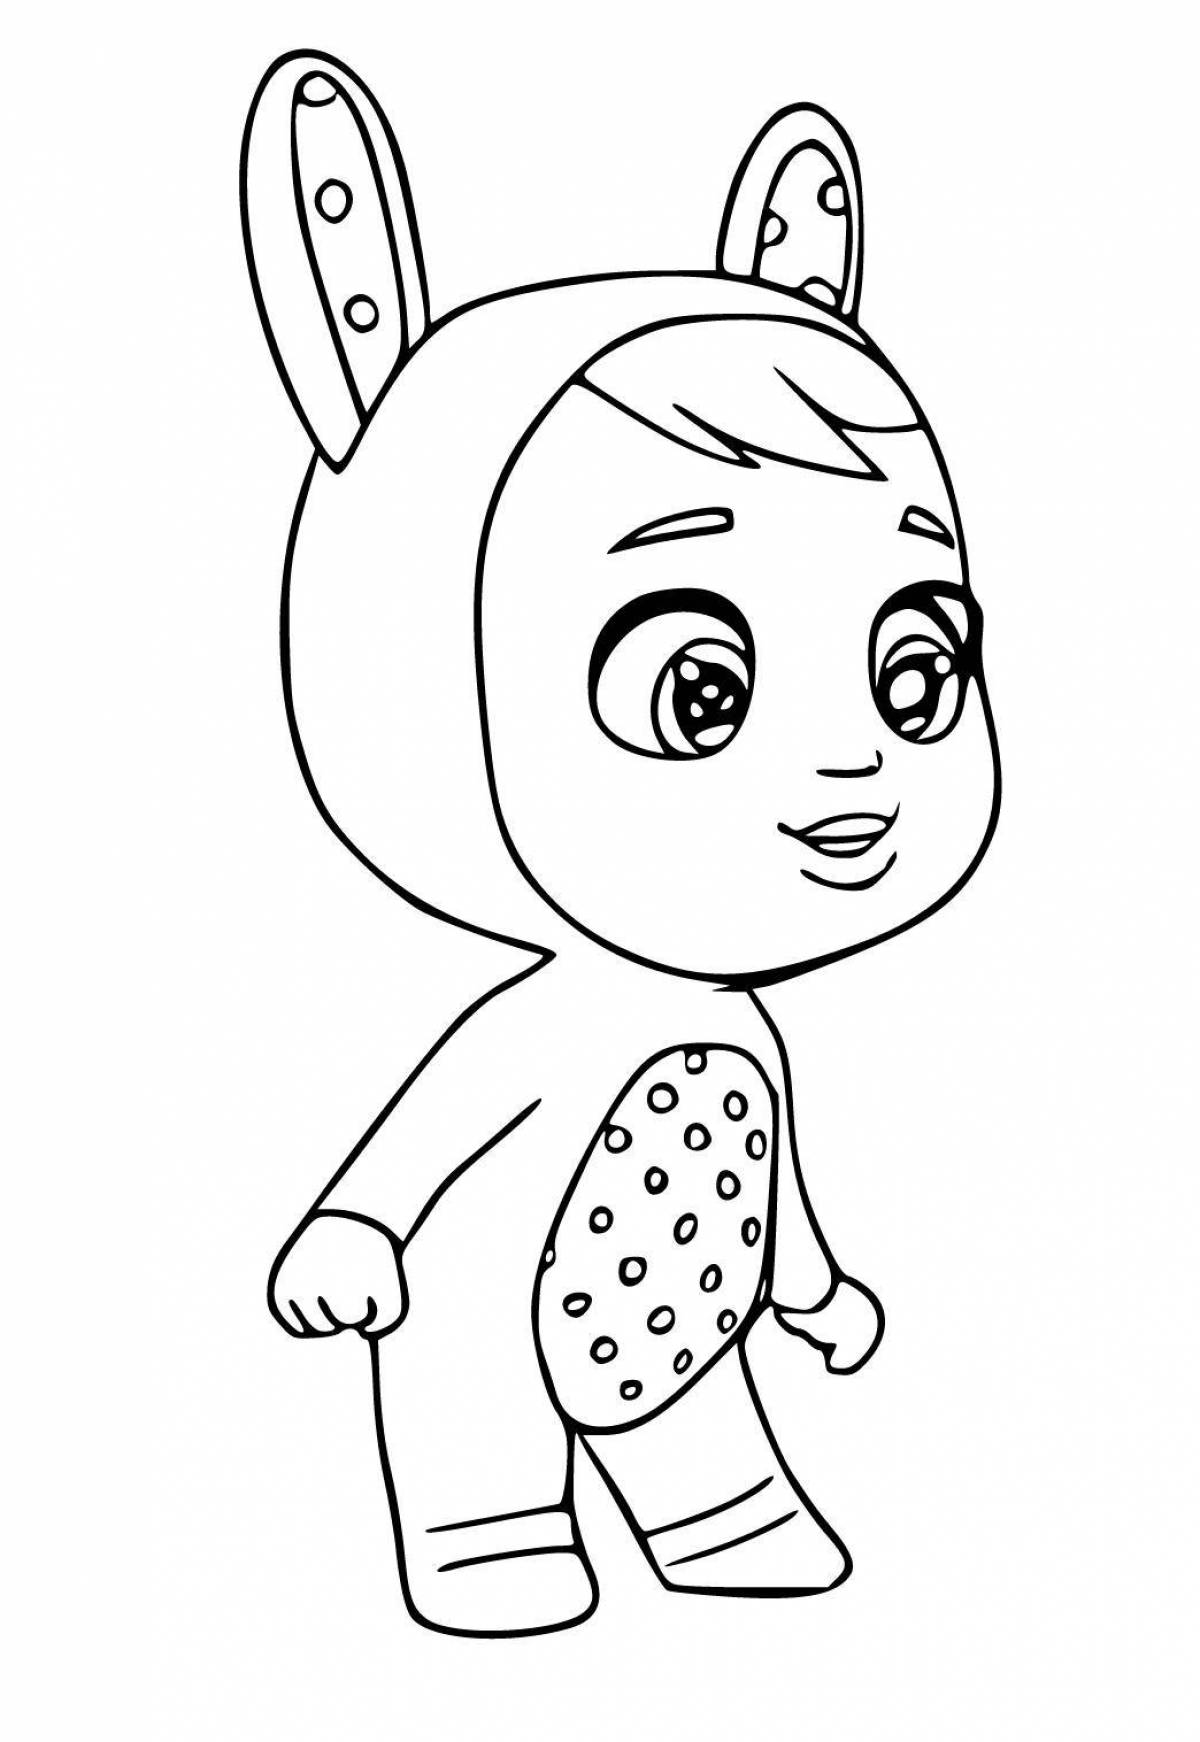 Sweet bunny doll coloring